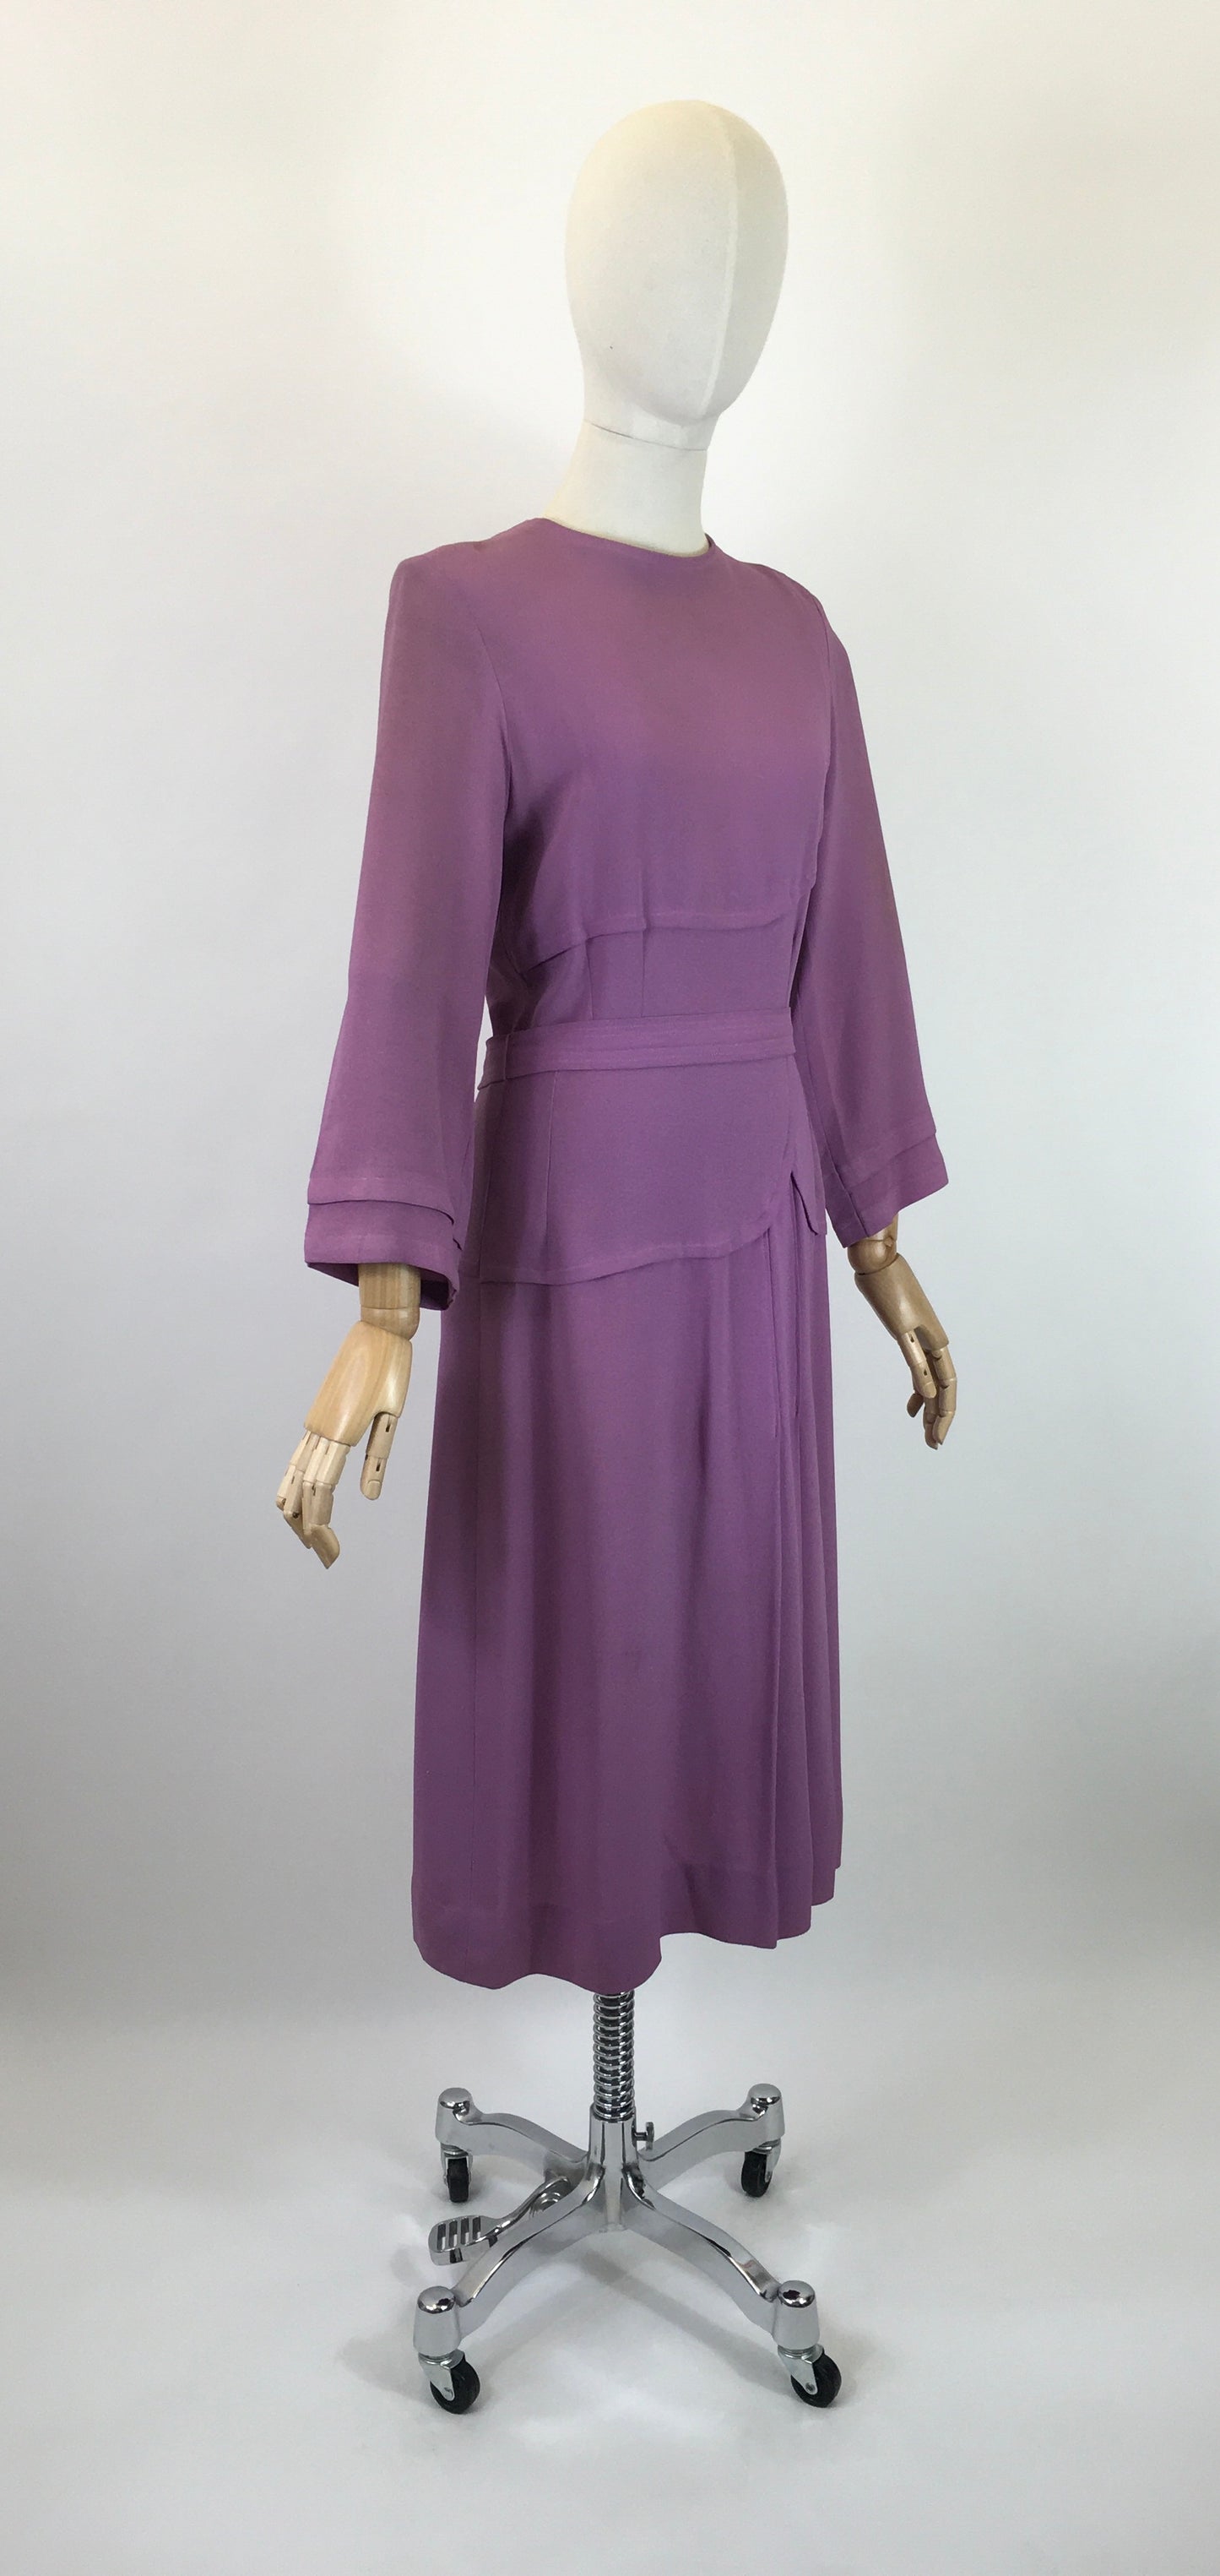 Original 1930’s Stunning Crepe Dress - In a Powdered Lilac